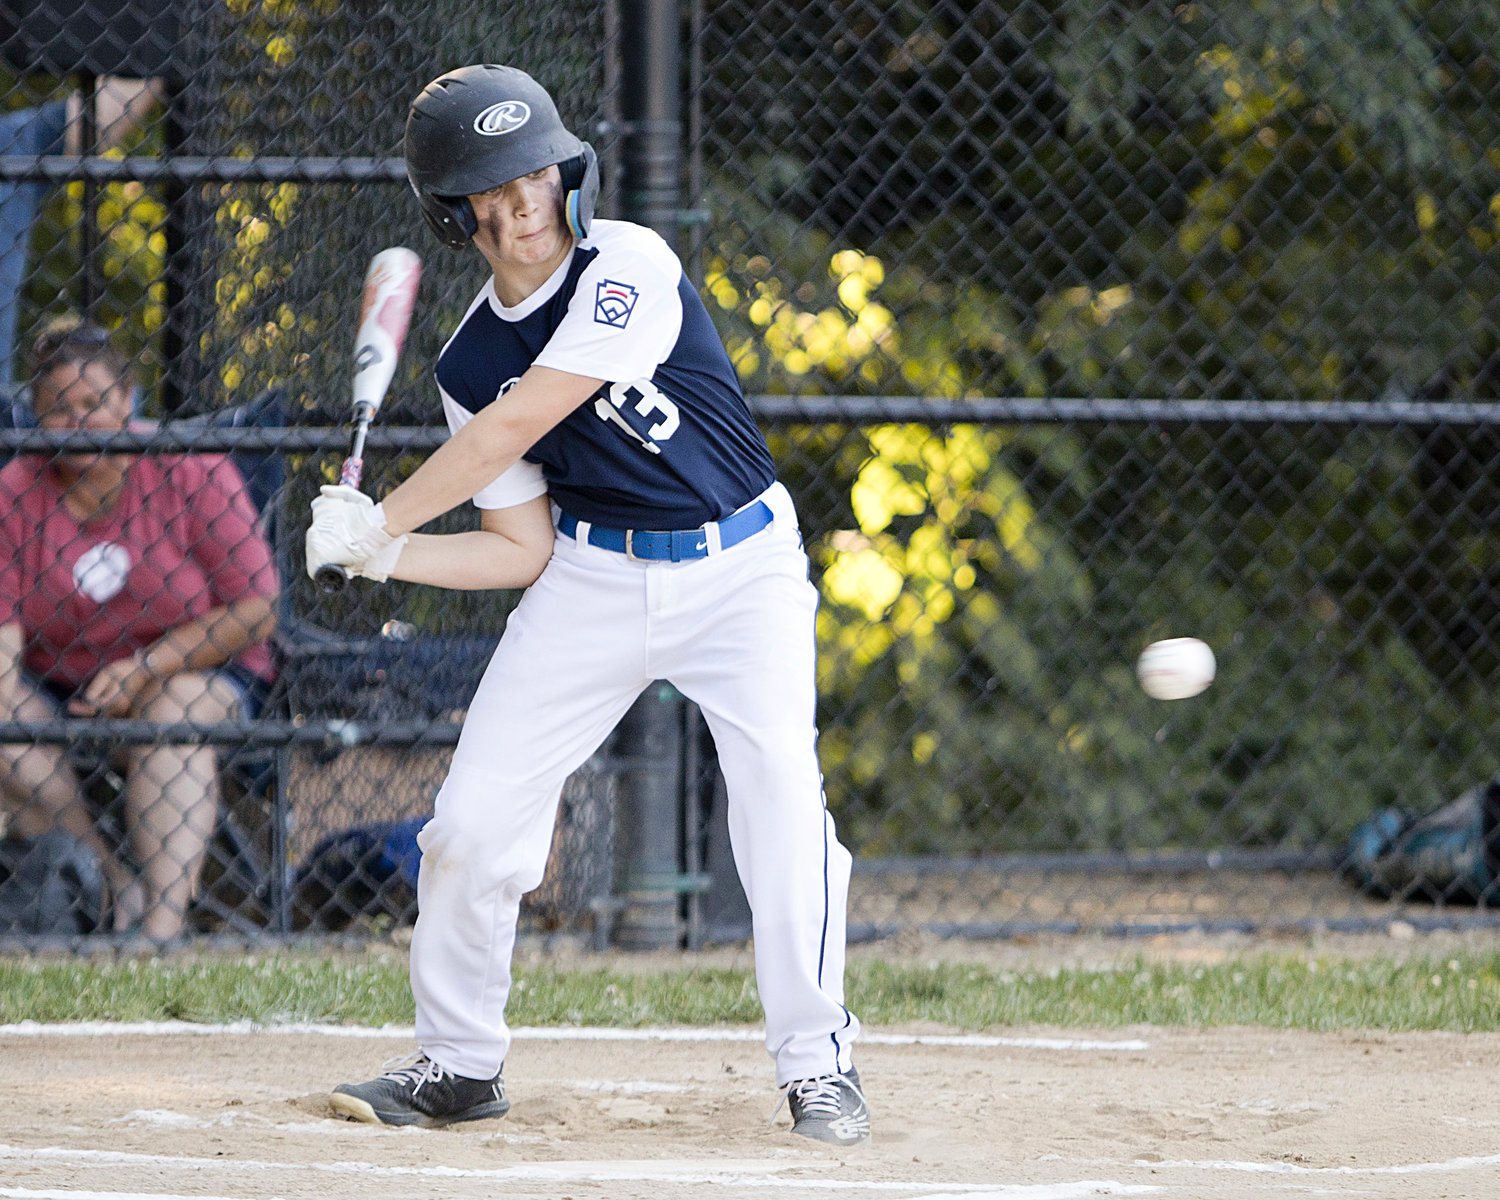 Sean Caldarella times the ball while battling East Providence in the 12U All-Star playoffs, Saturday.